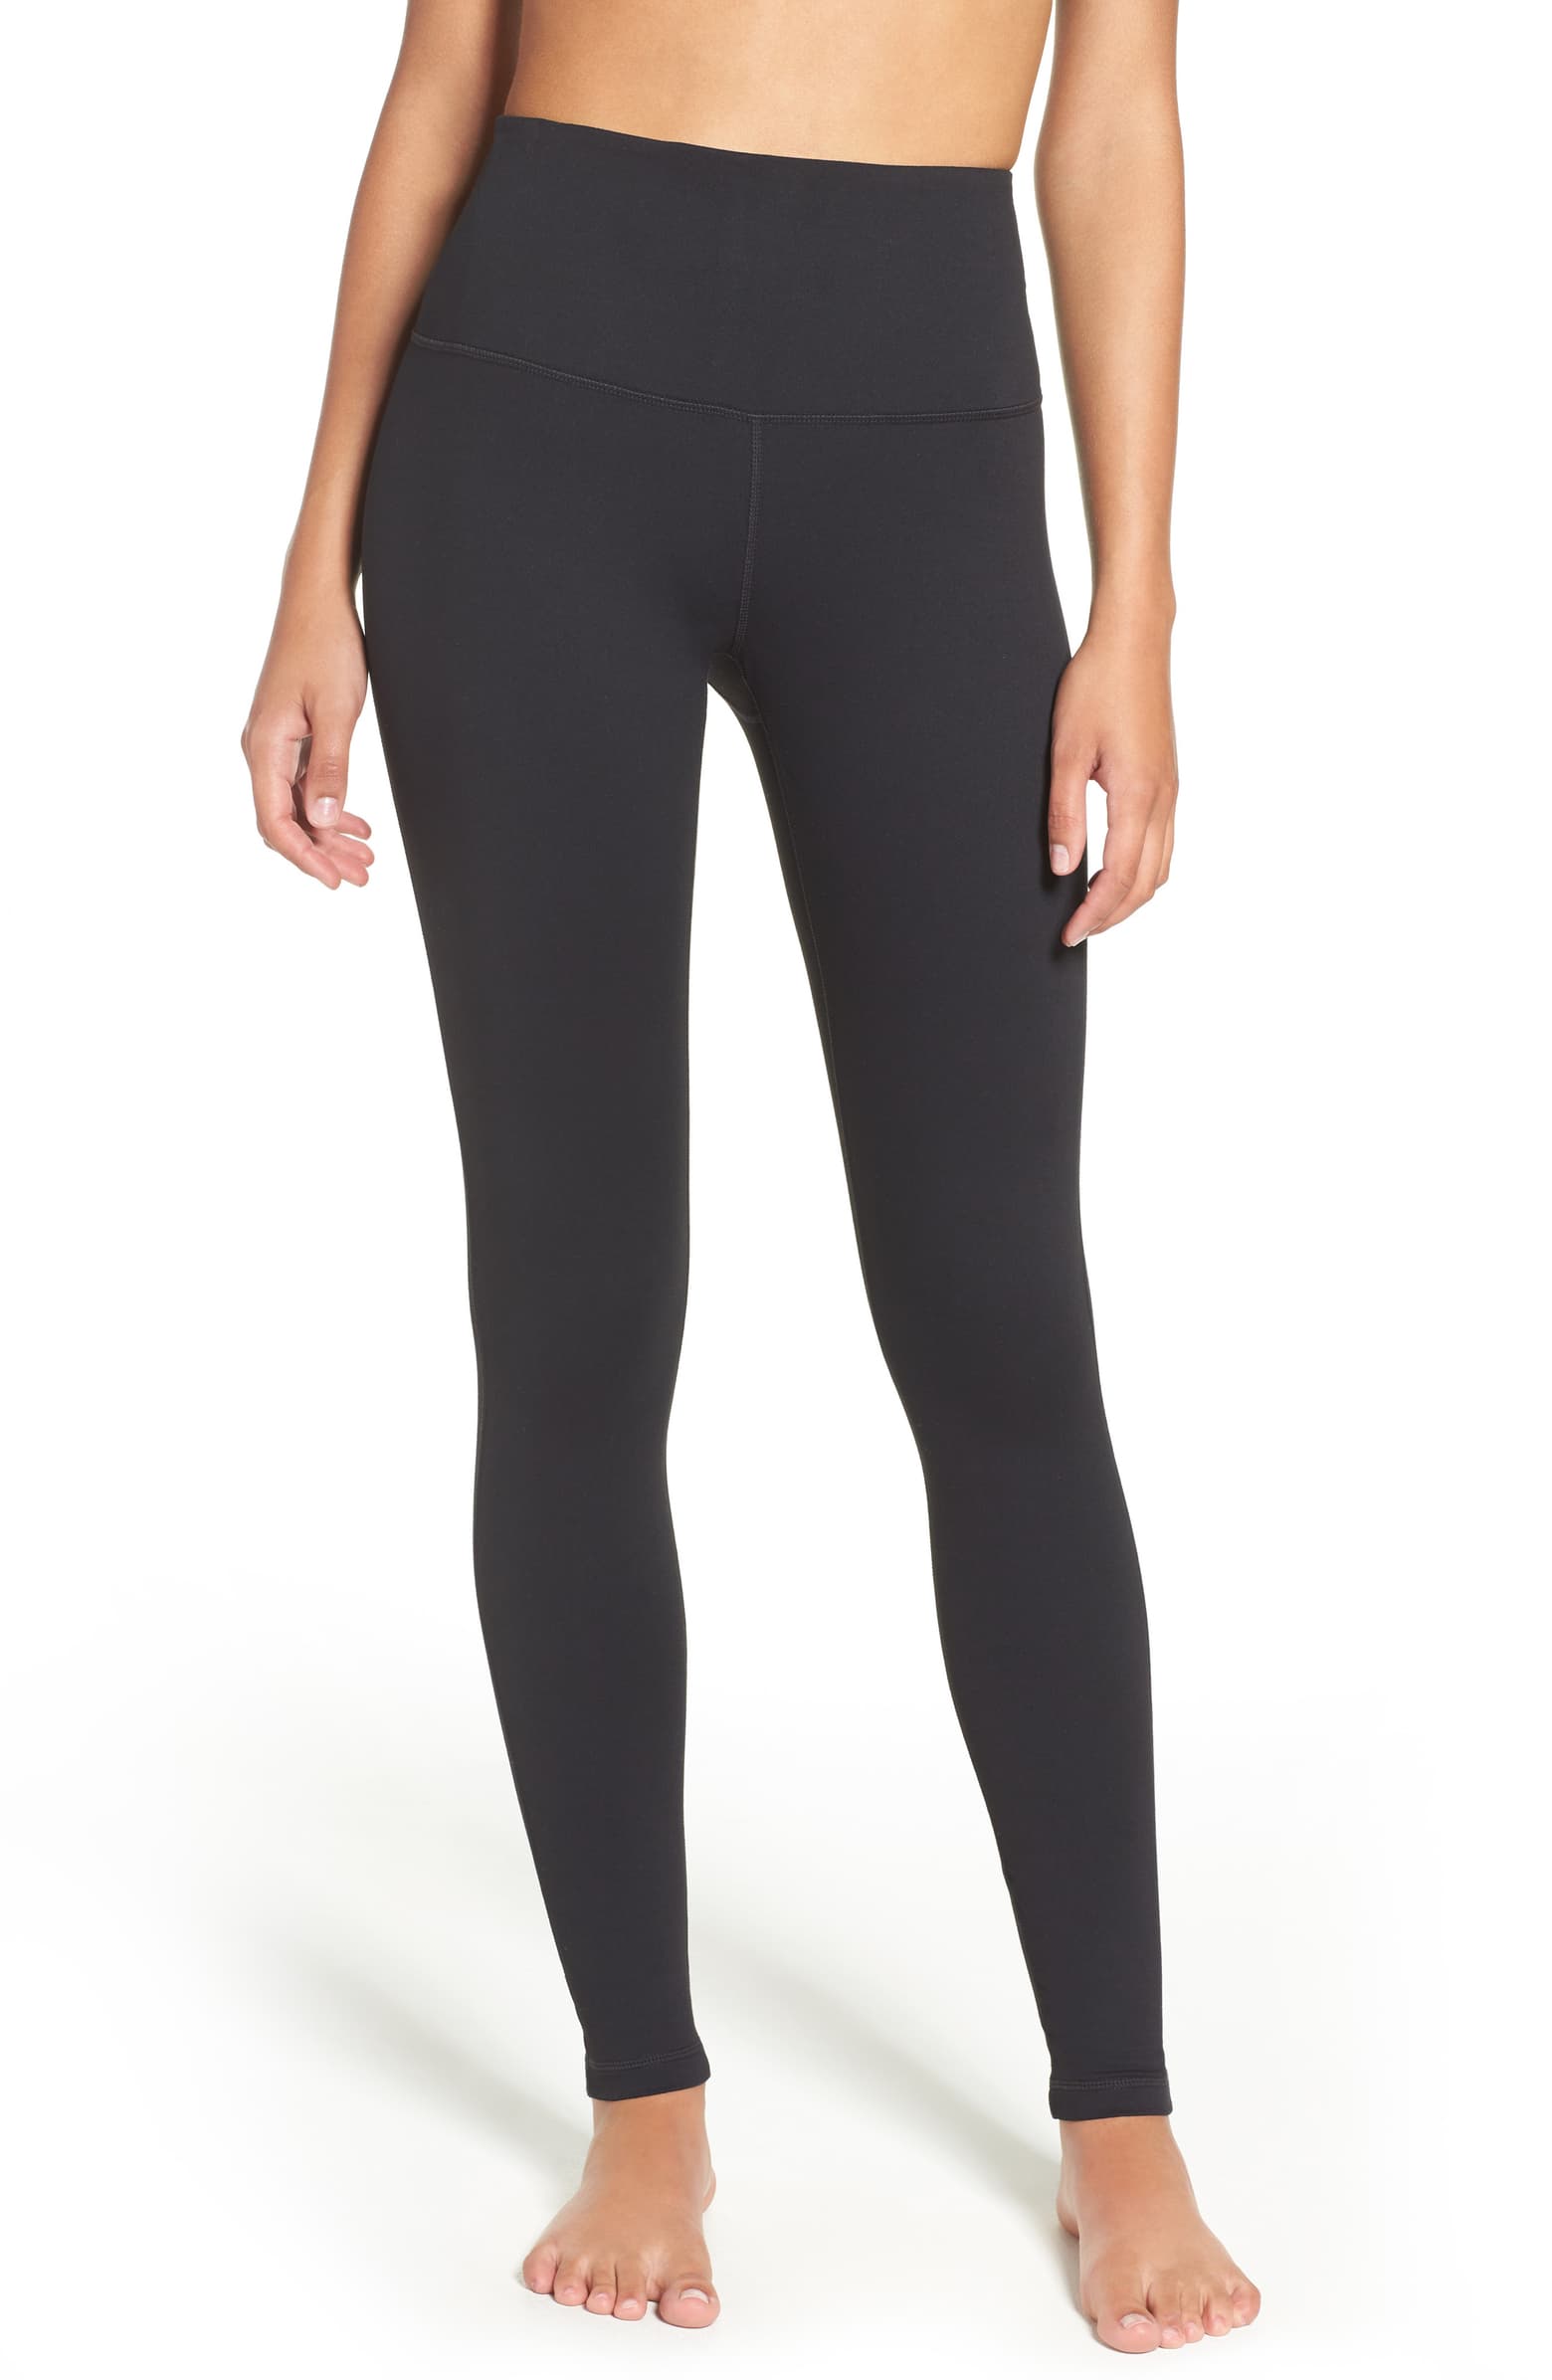 Deliberar Duplicar Resbaladizo The 29 Best Leggings for Pilates and the Brands to Shop | Who What Wear